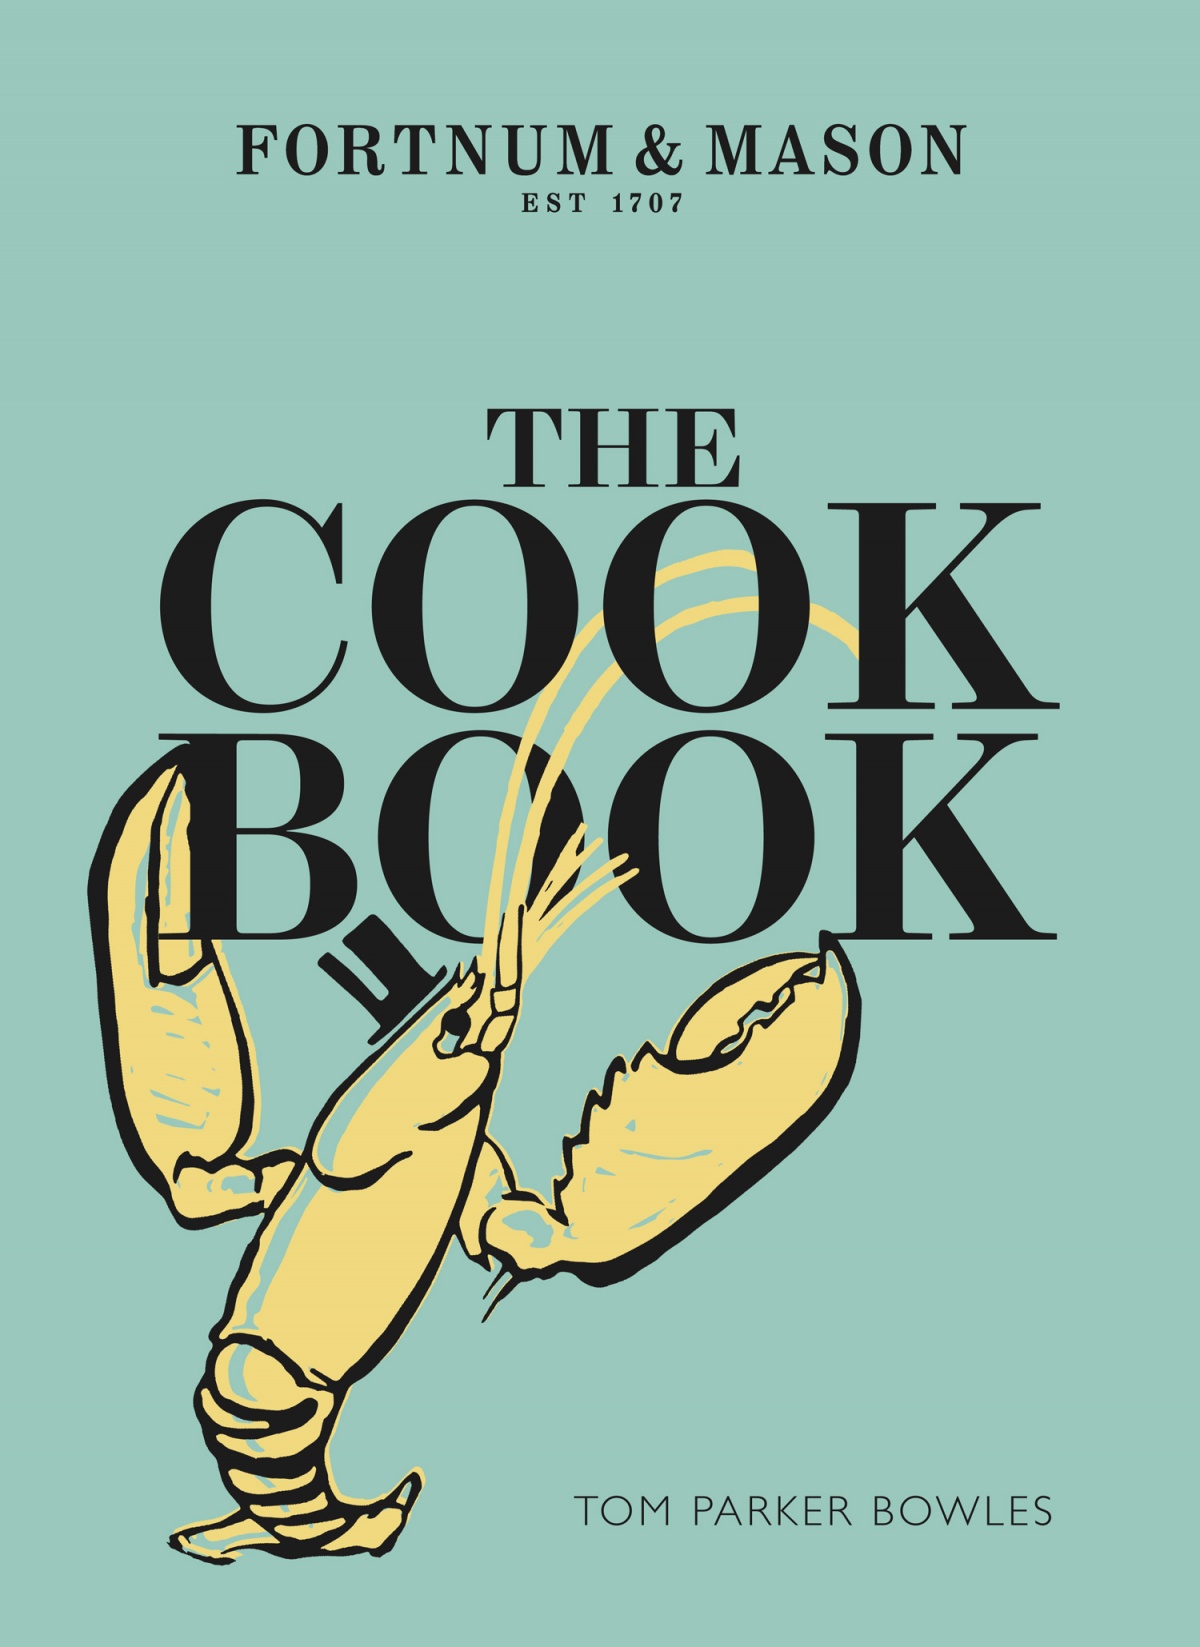 Book cover of Fortnum & Mason Cook Book by Tom Parker Bowles